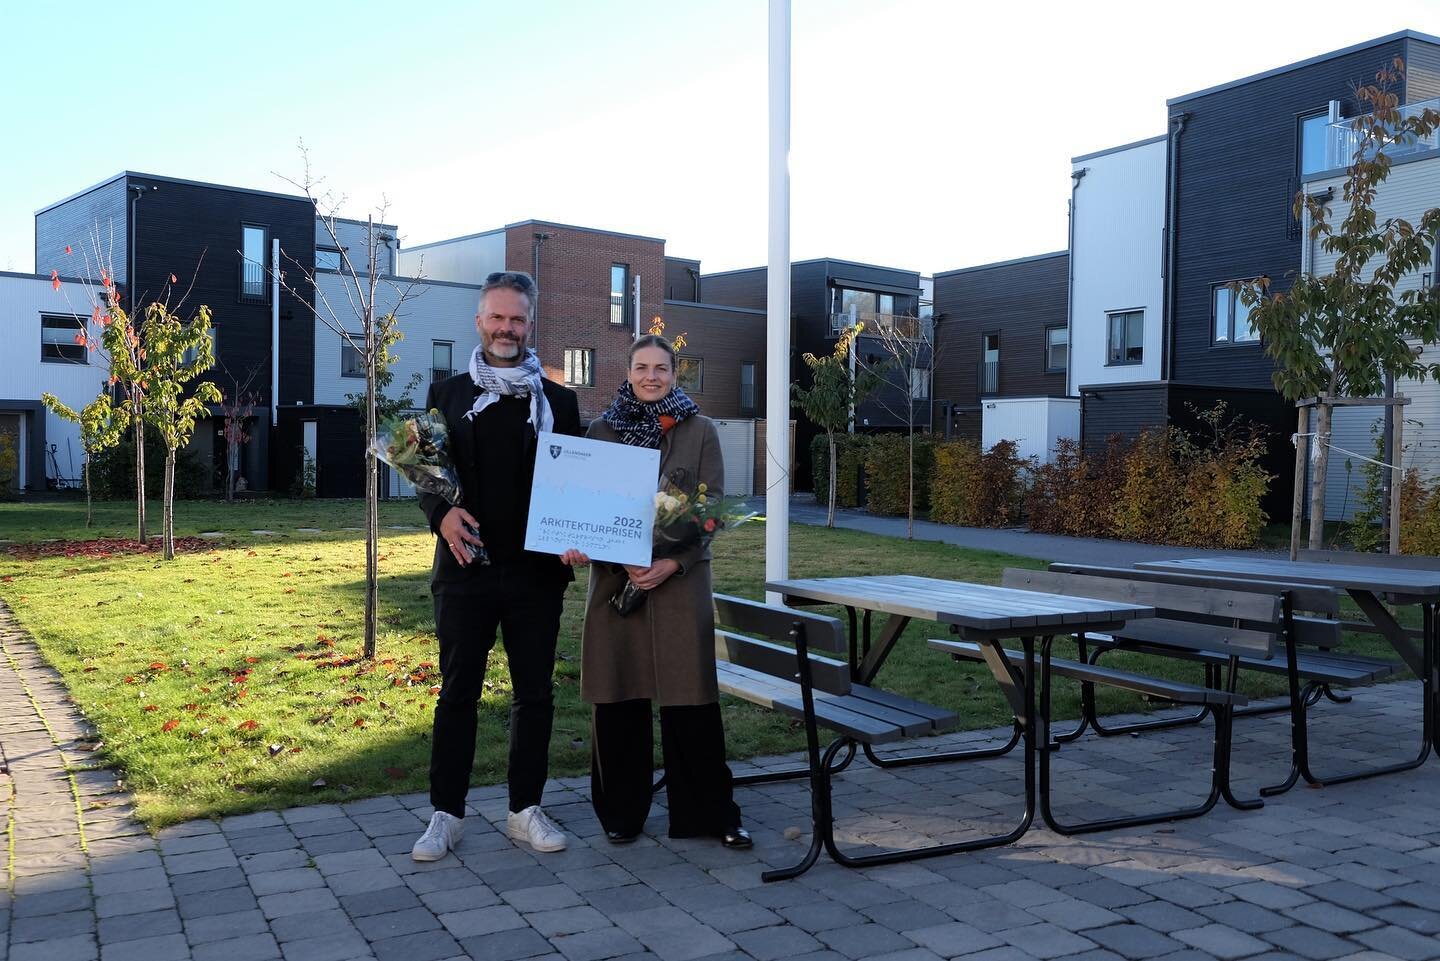 Jessheim Hage Wins Architecture Prize

The Architecture Prize for @ullensakerkommune is awarded for the second time following the initiative of mayor Eyvind J&oslash;rgensen Schumacher, who emphasized the importance of architects and developers going